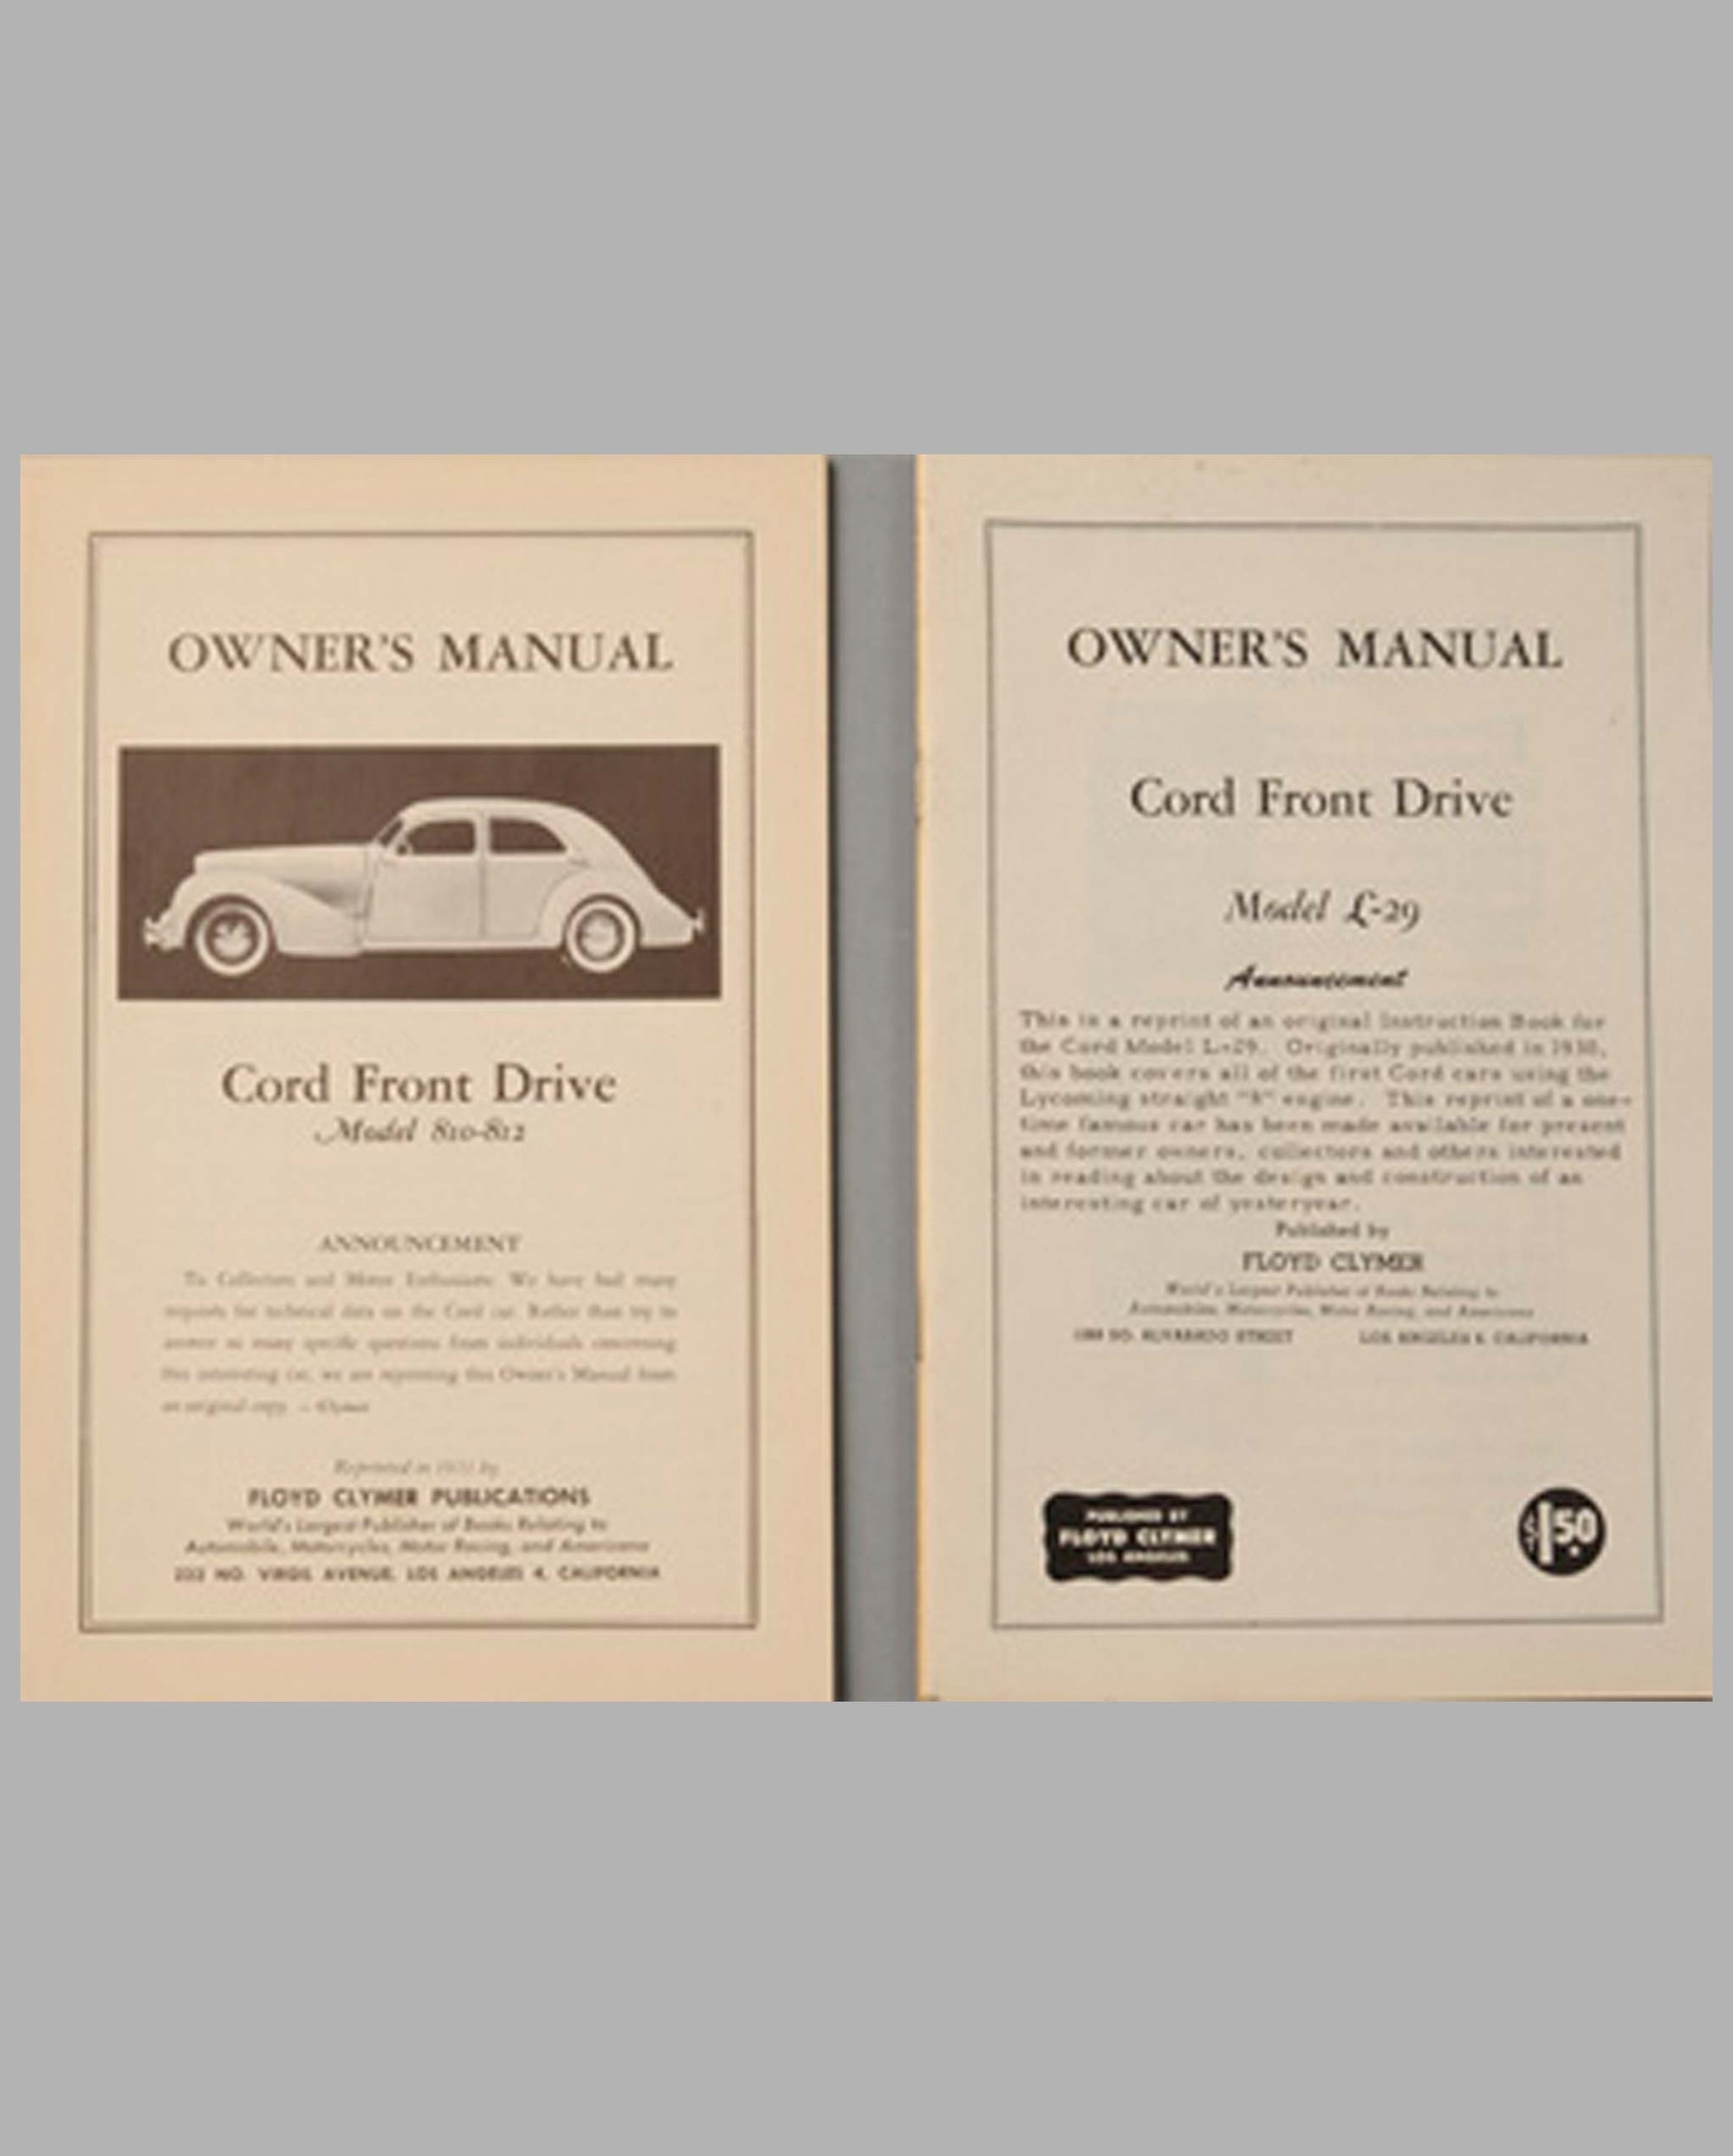 Two Cord owner’s manual reprints by F. Clymer